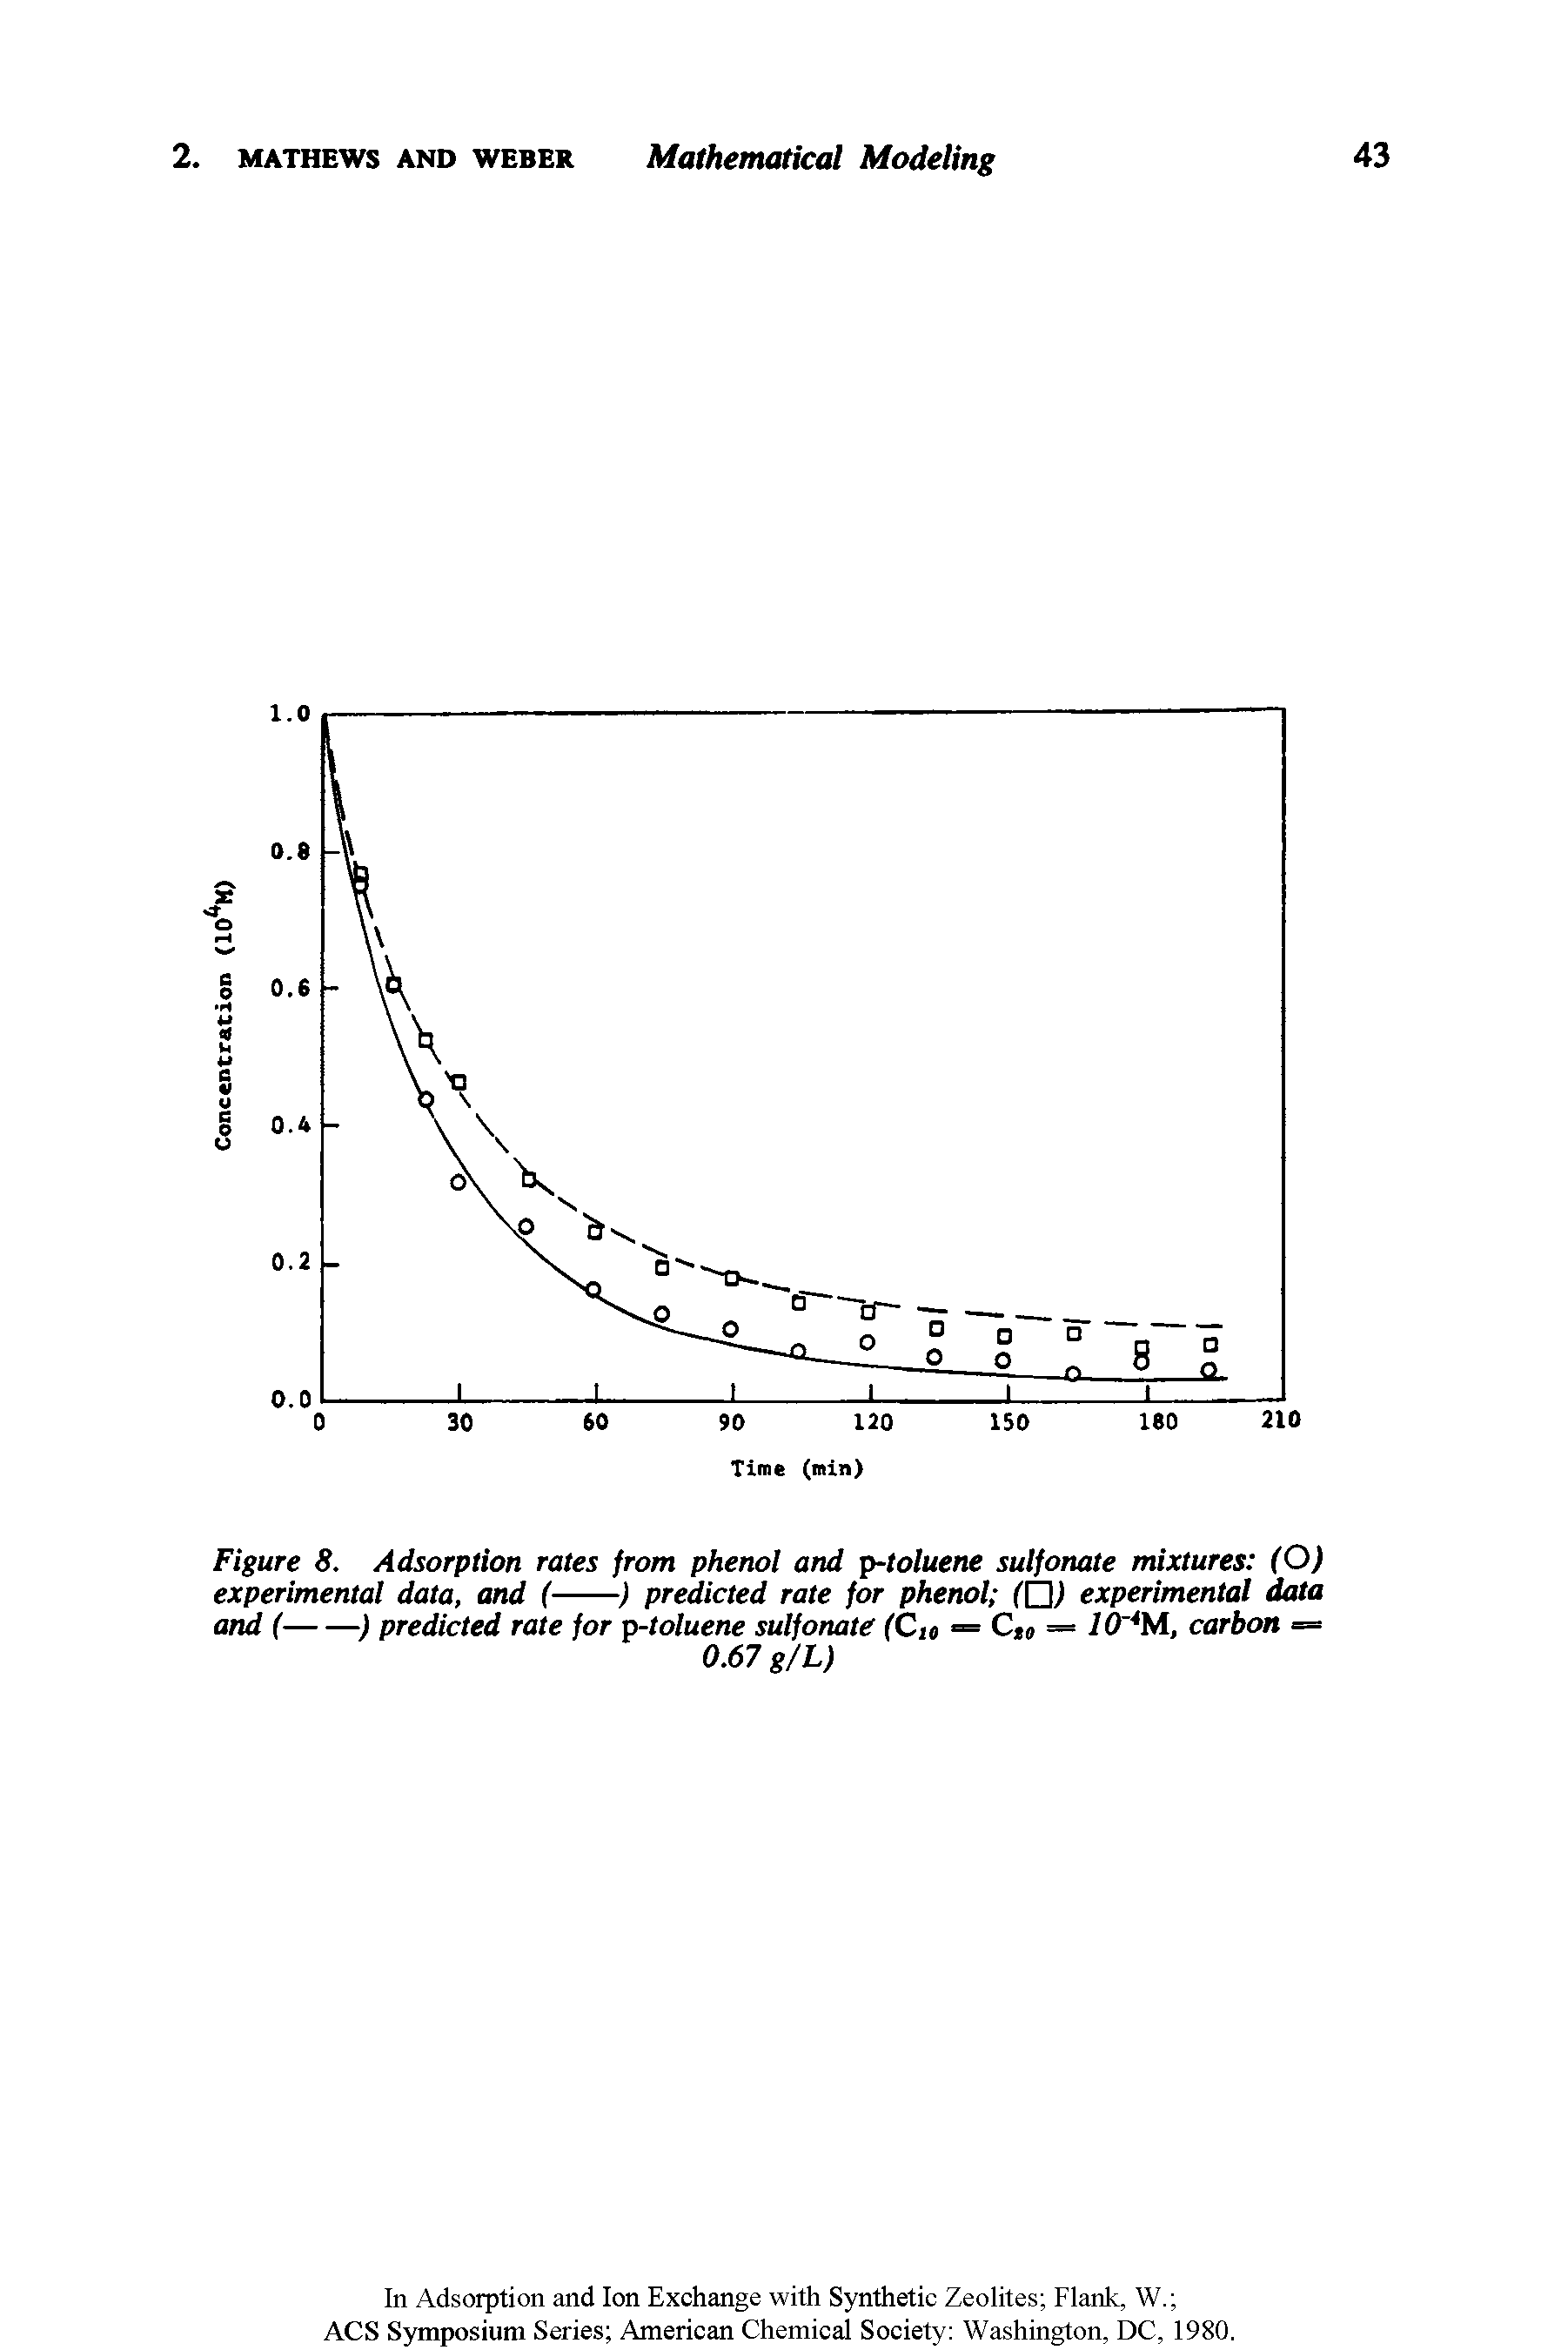 Figure 8. Adsorption rates from phenol and p-toluene sulfonate mixtures (O)...